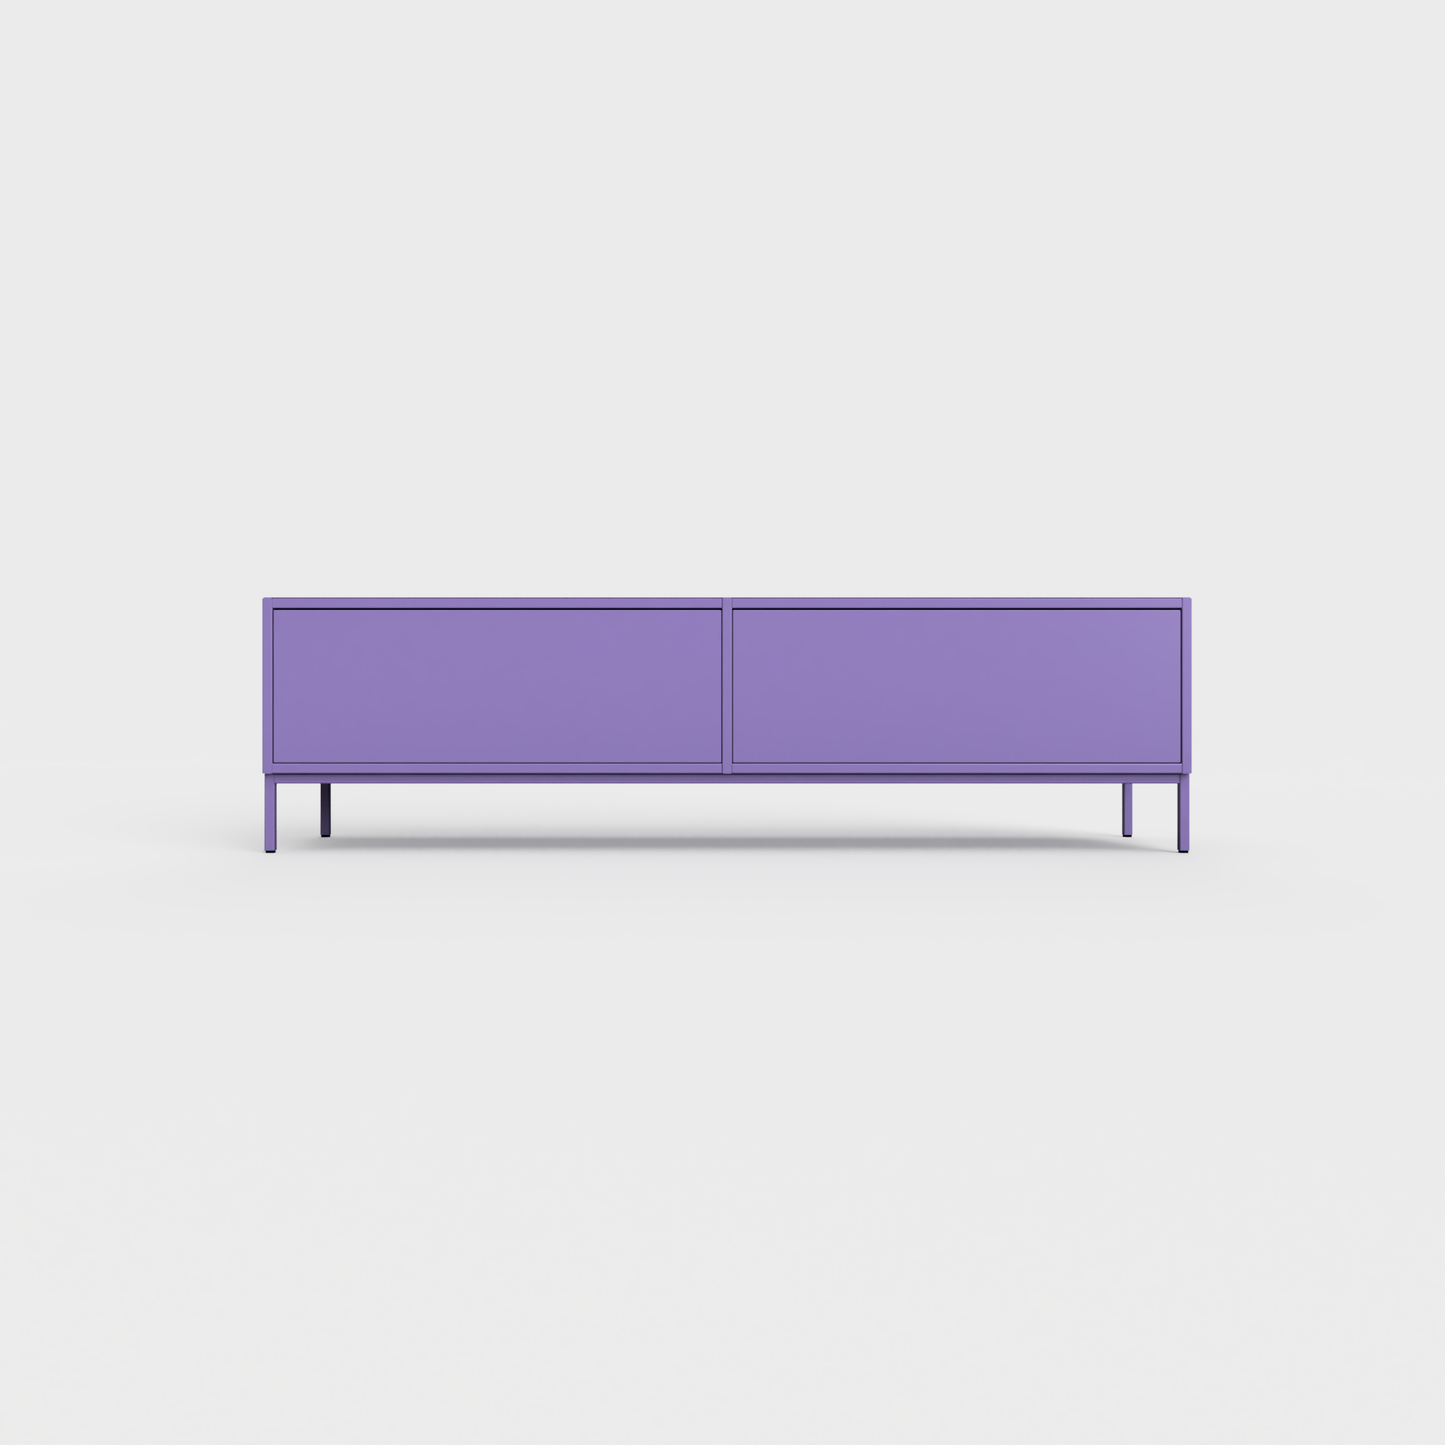 Prunus 01 Lowboard in Iris color, powder-coated steel, elegant and modern piece of furniture for your living room